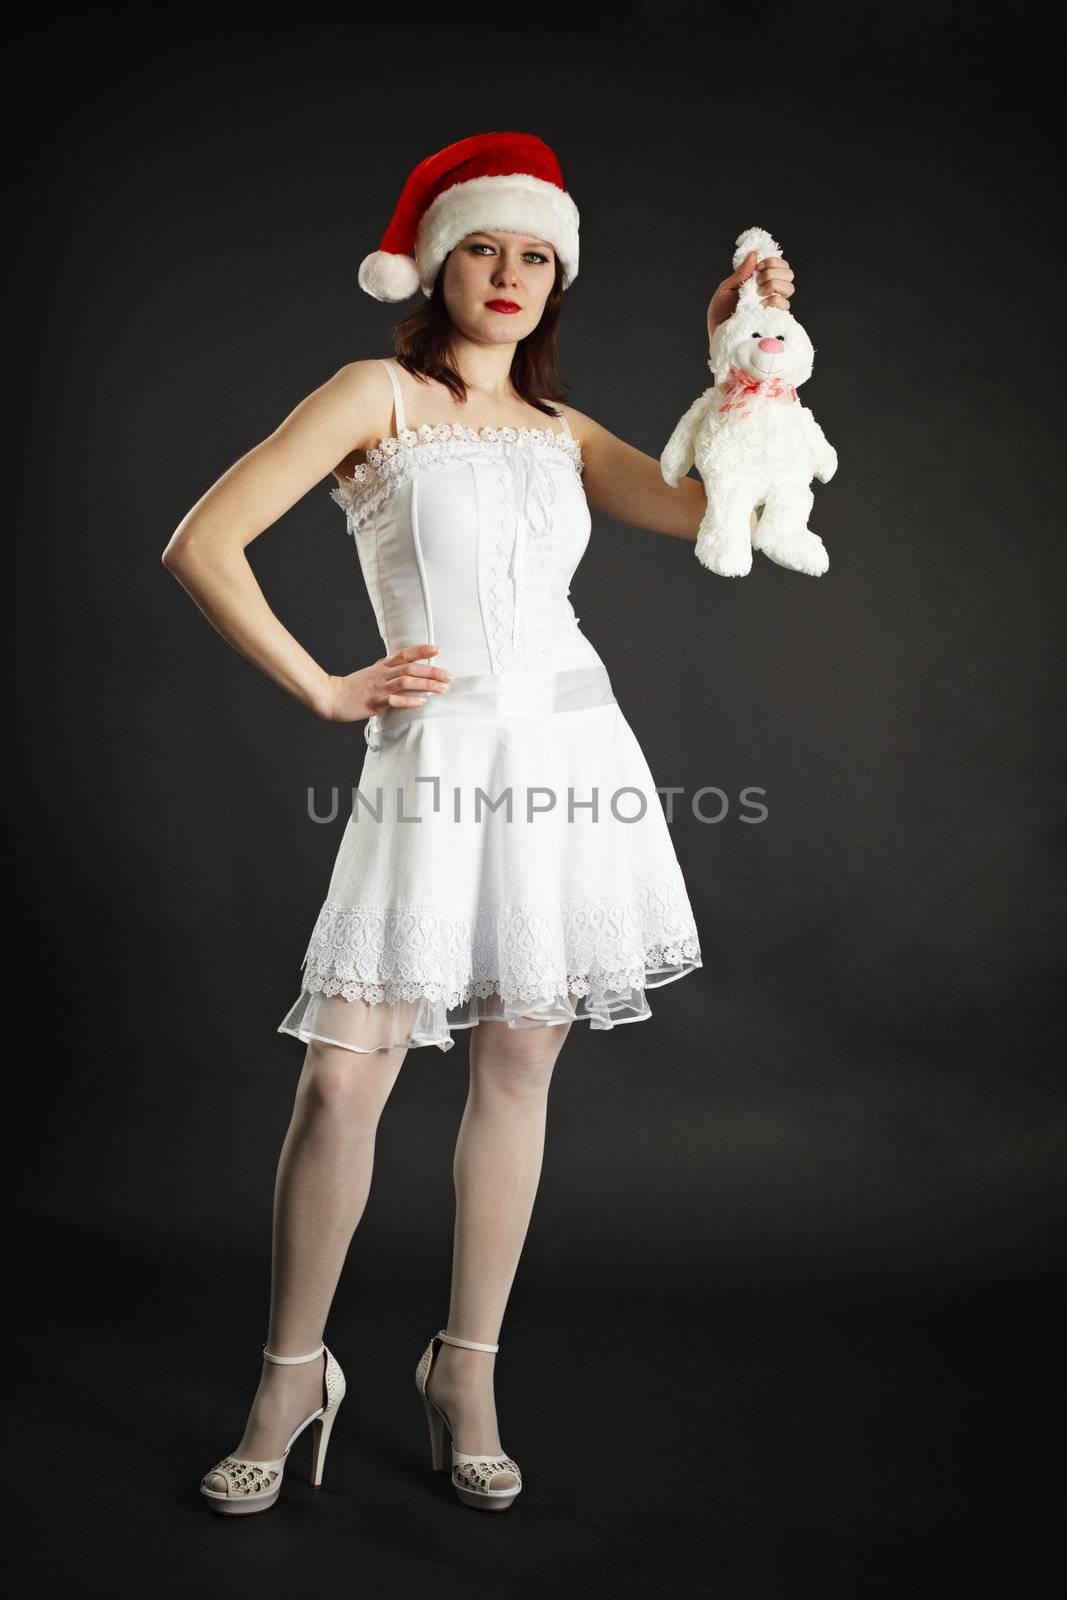 Beautiful girl in white dress holding a white rabbit